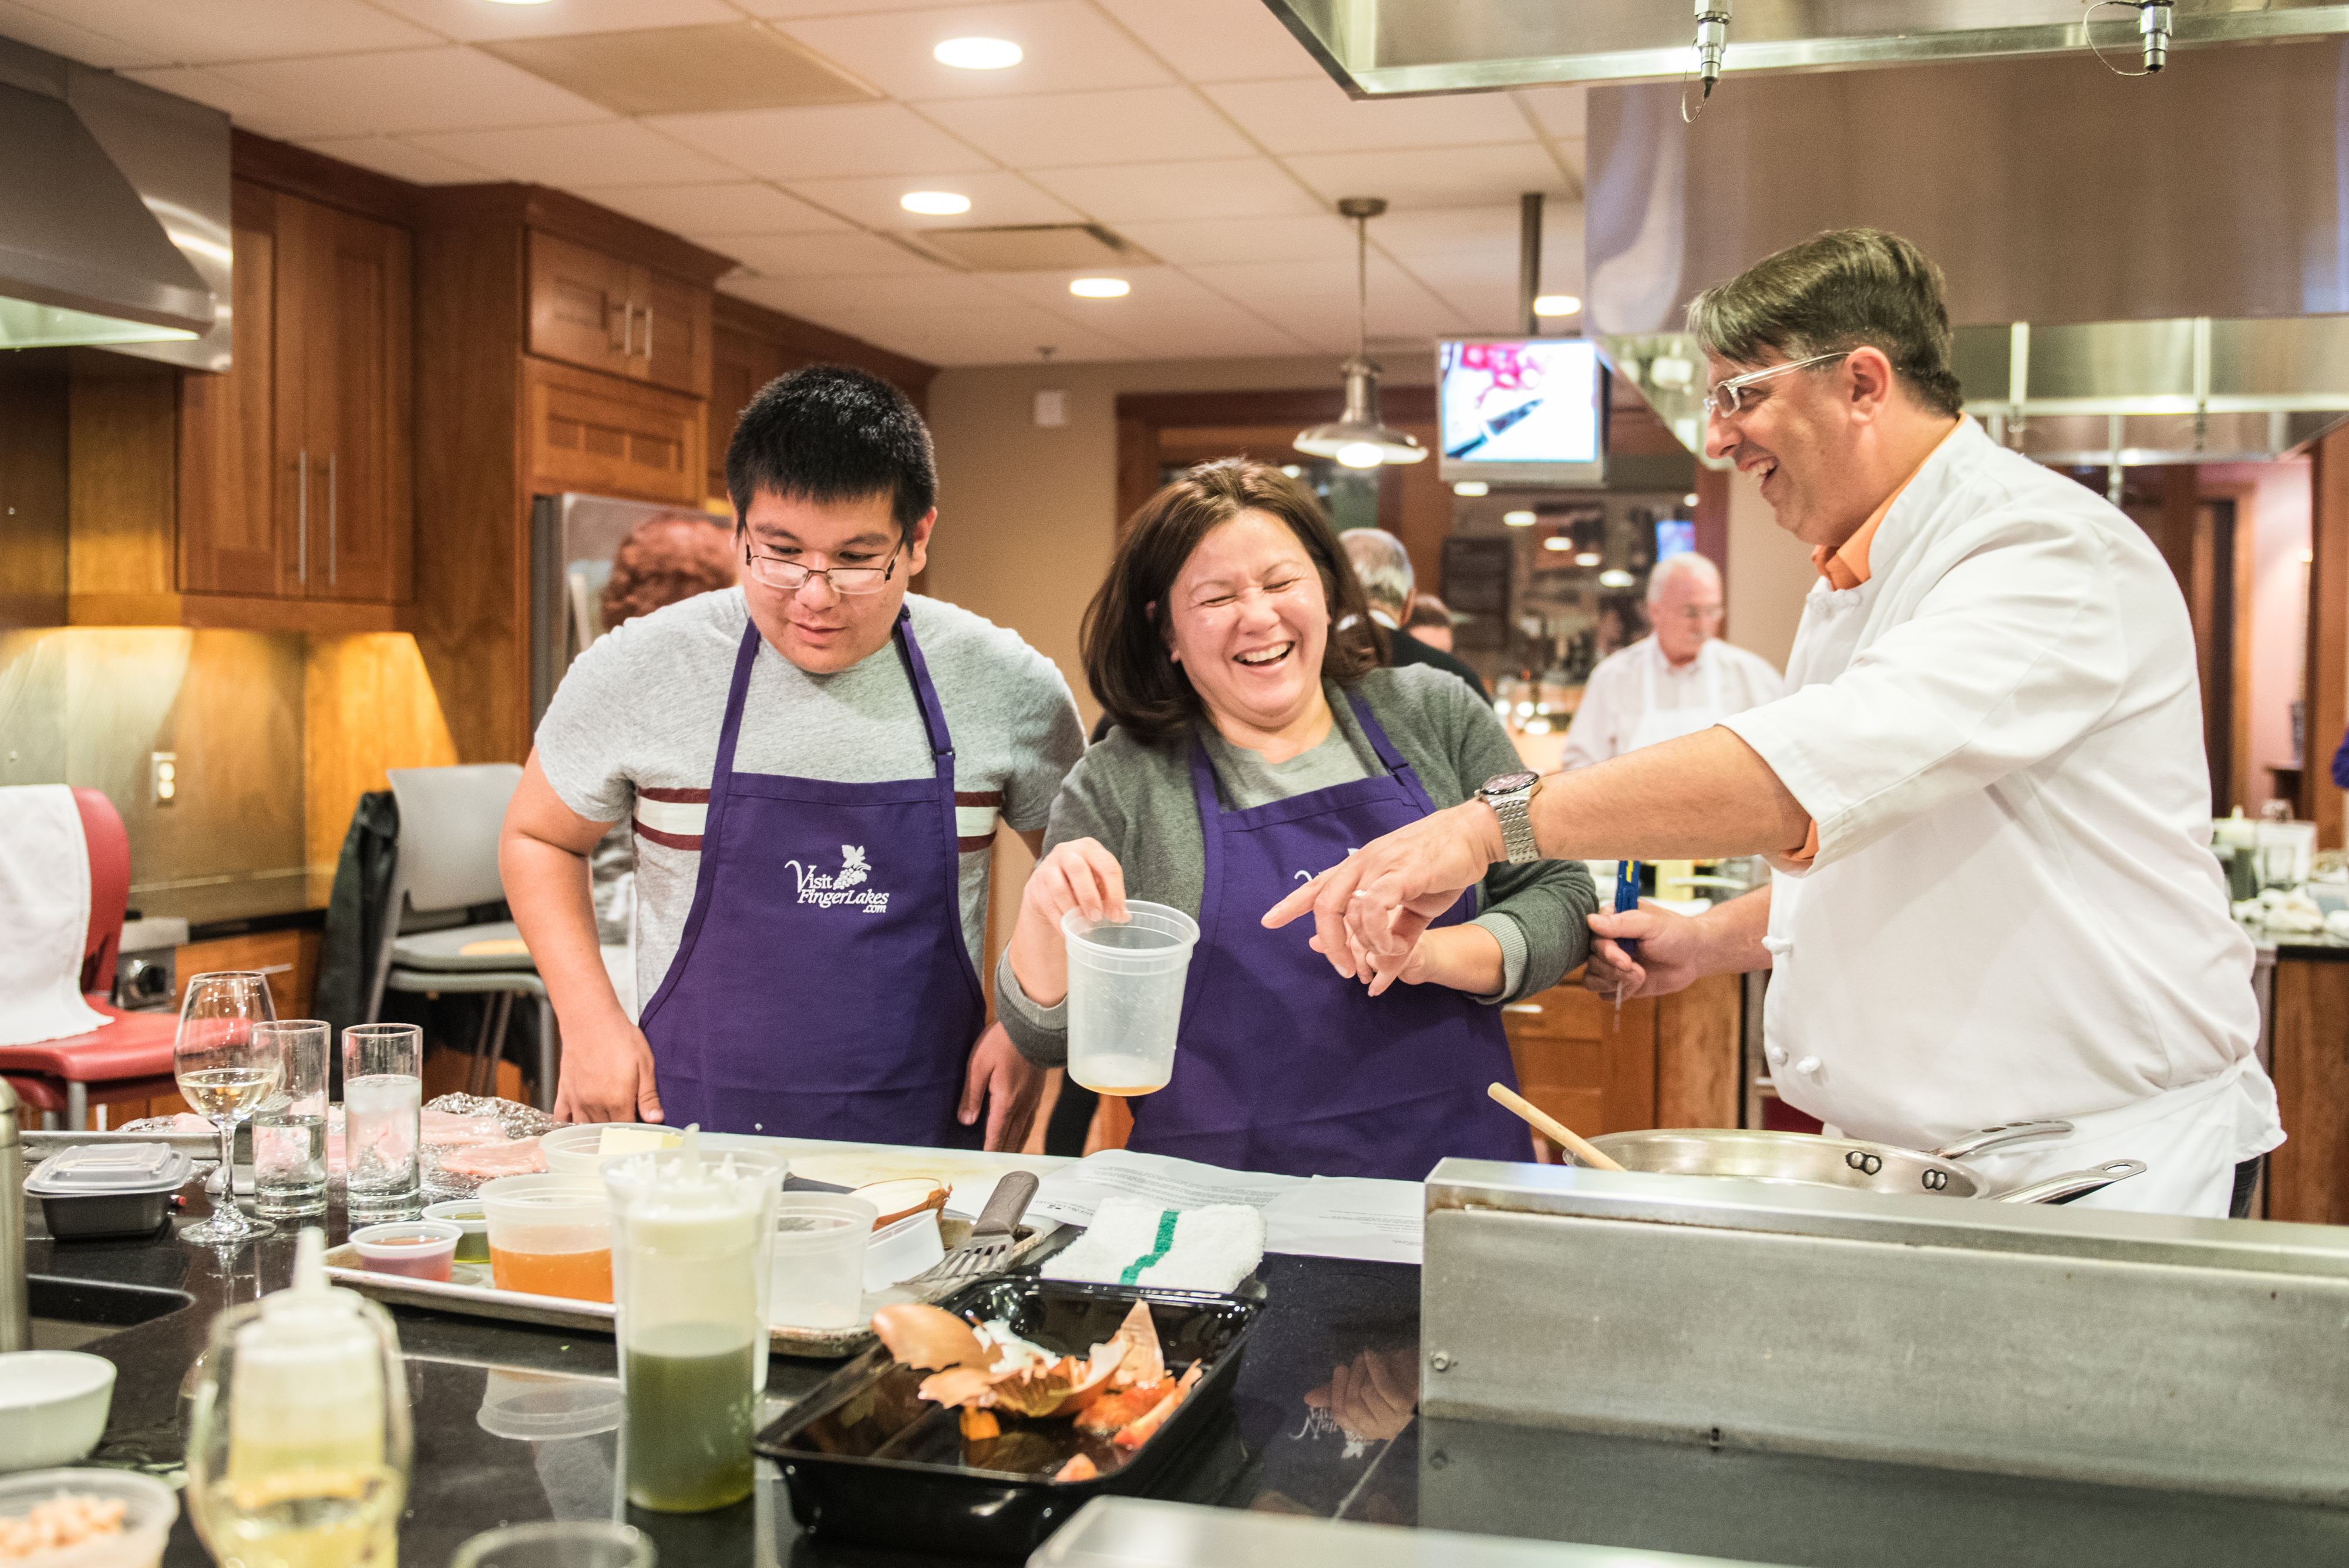 nywcc-canandaigua-hands-on-kitchen-laughing